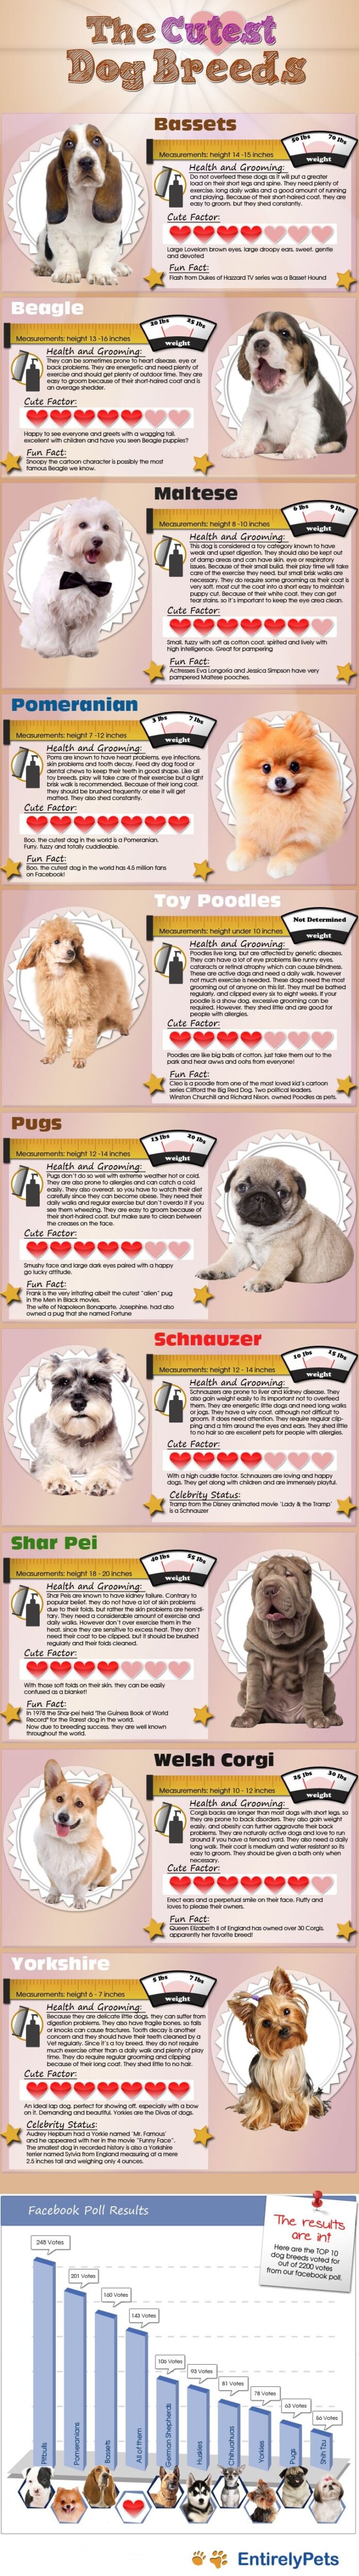 cutest-dog-breeds-infographic